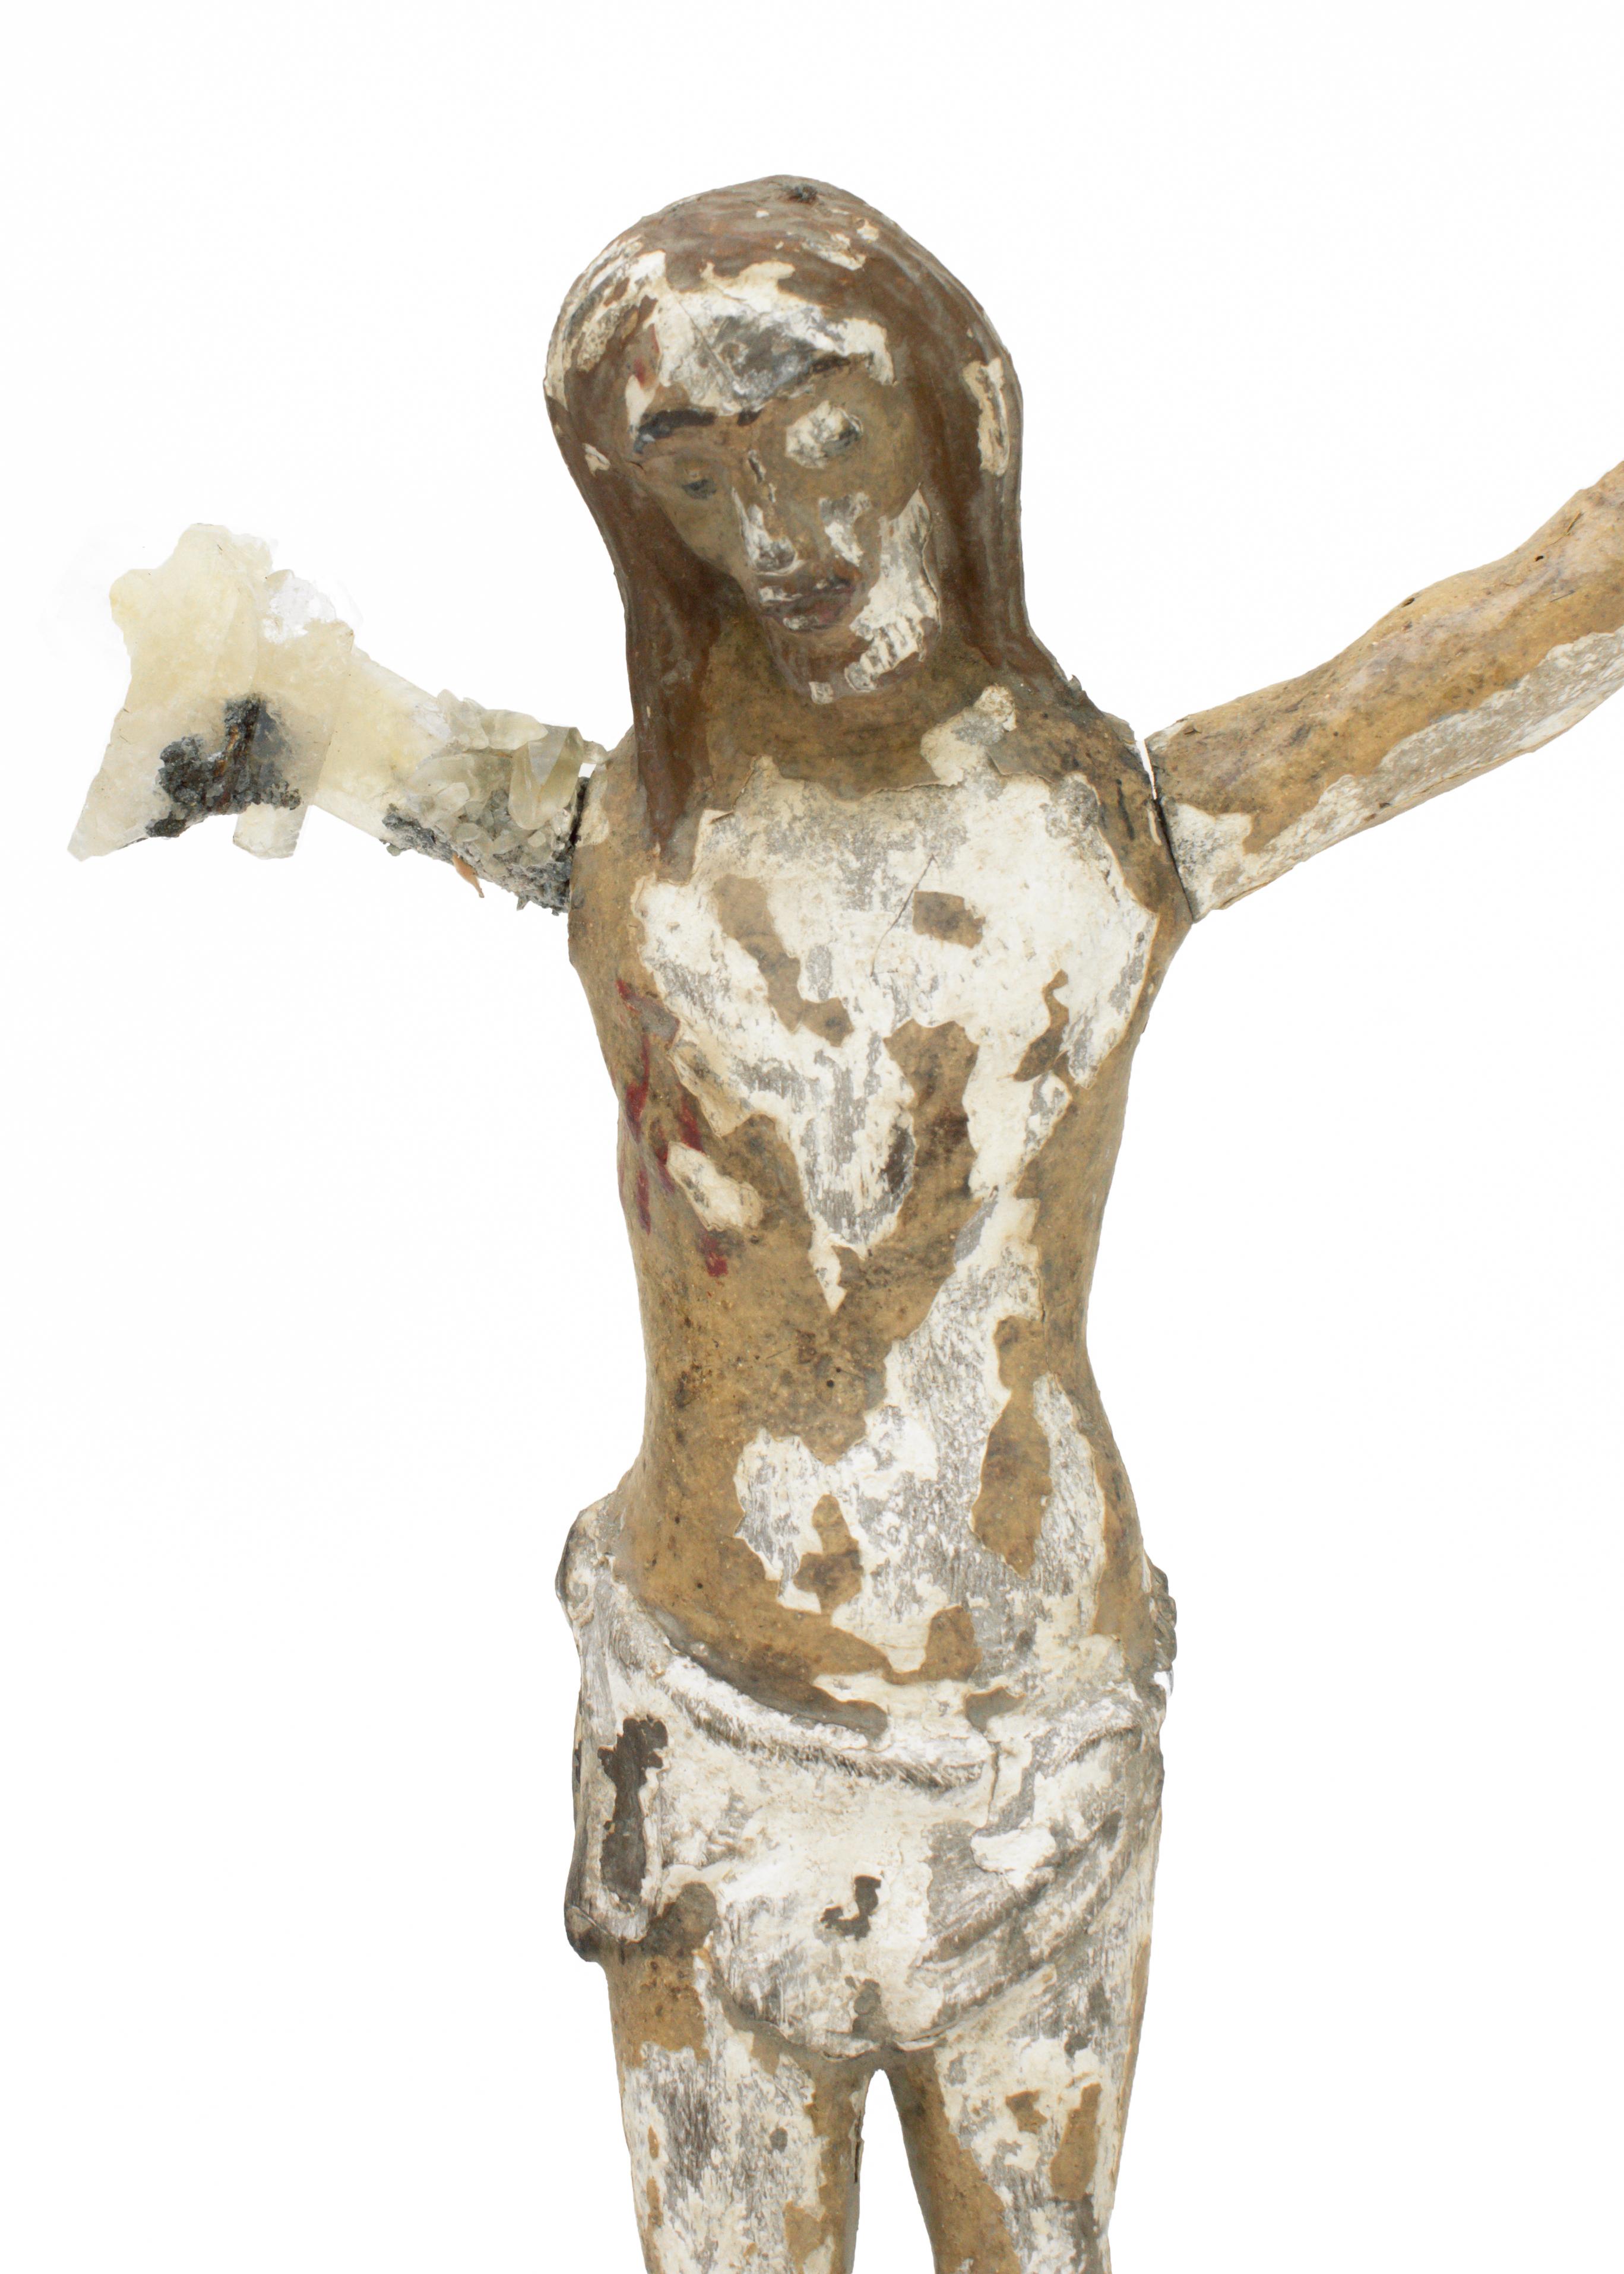 17th century Italian (Tuscan) figure of Christ decorated with calcite crystals on a barite and calcite crystal specimen with chalcopyrite. The hand carved figure of Christ is from a church in Tuscany and the base is a rare mineral combination of